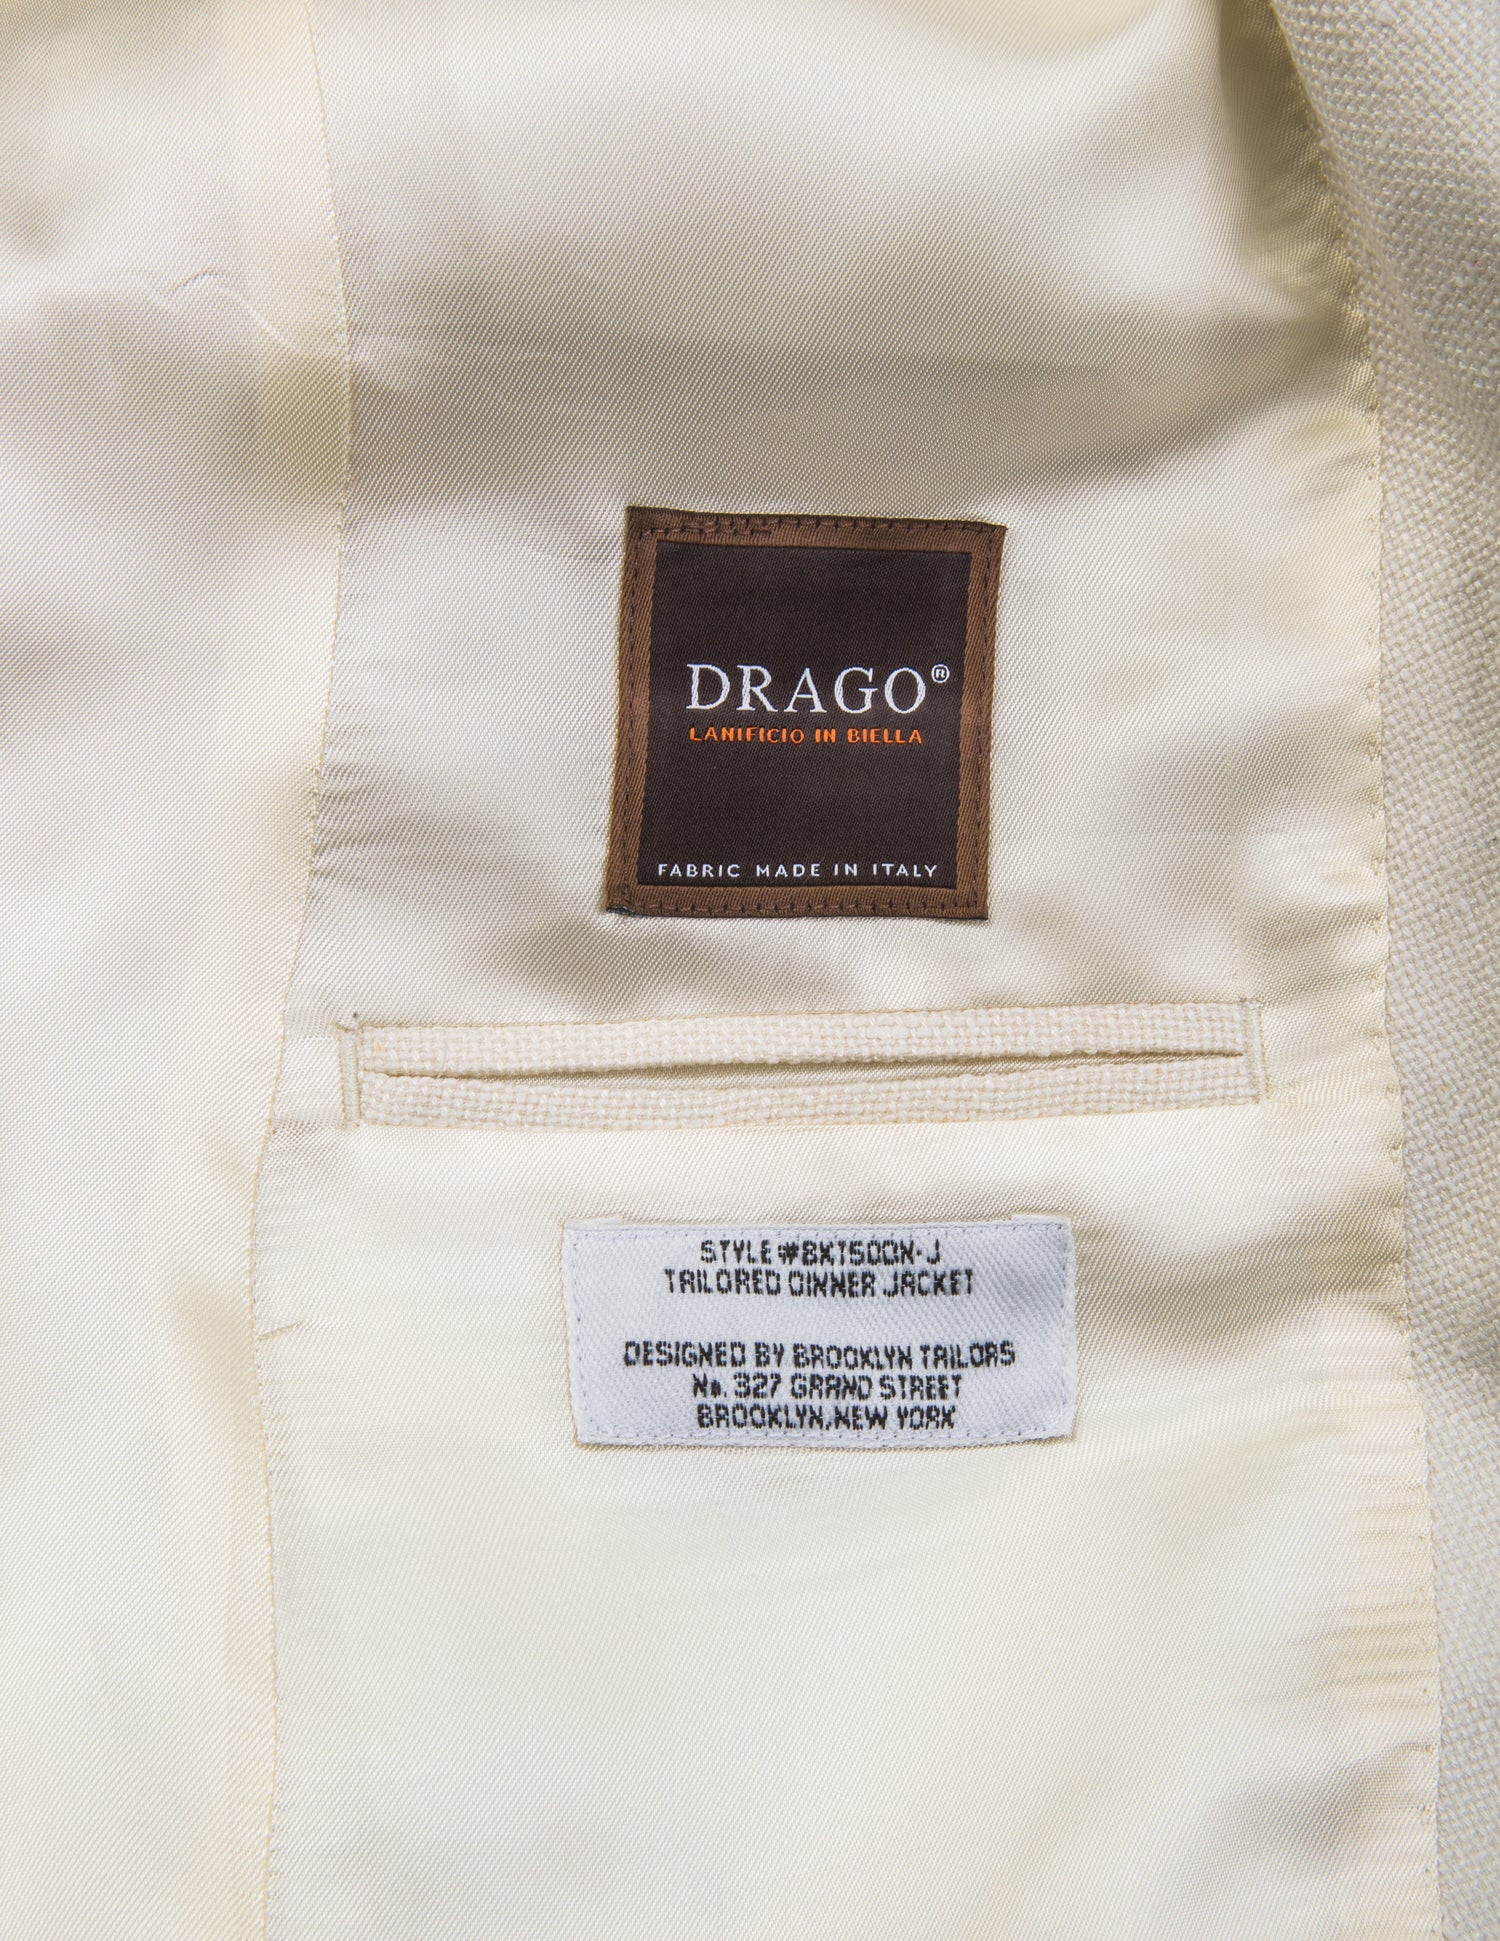 Detail shot of Brooklyn Tailors BKT50 Shawl Collar Dinner Jacket in Silk & Wool Hopsack - Ivory showing Drago label on interior of jacket